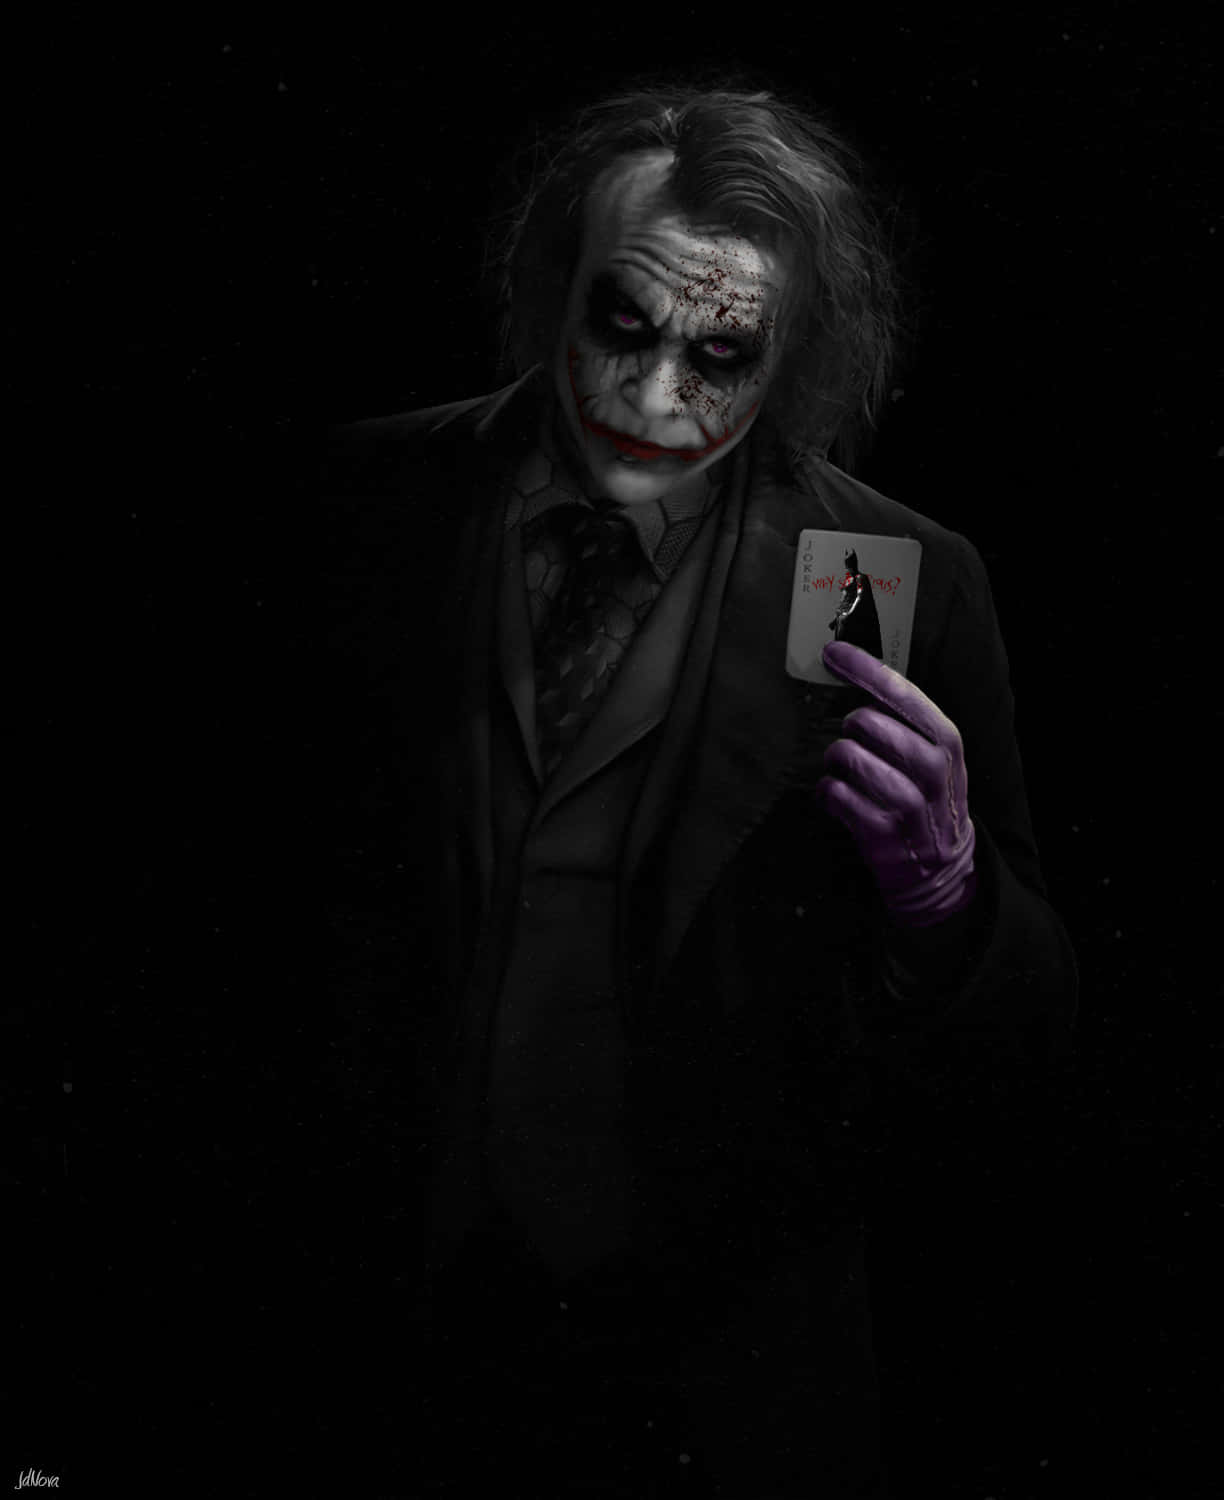 Download “The Joker spreading chaos and mayhem” | Wallpapers.com